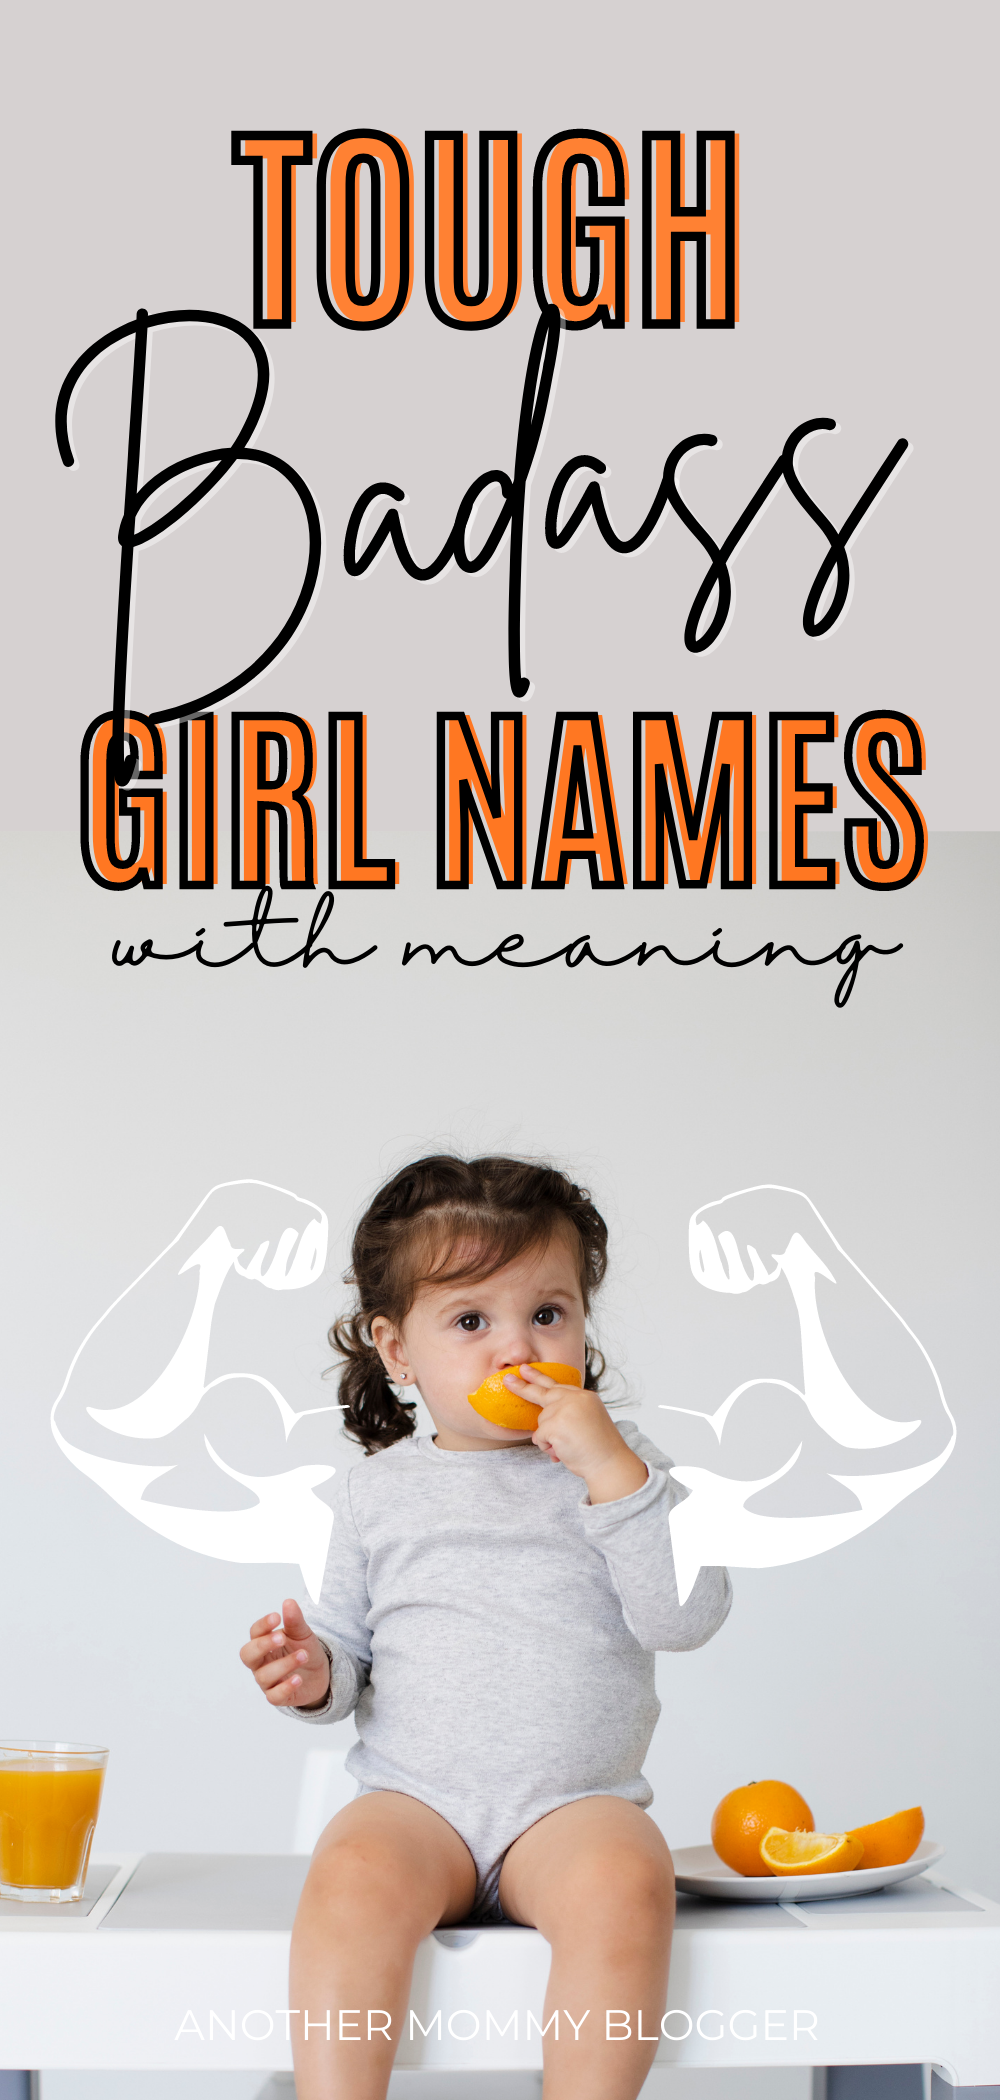 These badass girl names sound strong and tough. These are beautiful unique girl names with meaning you’re going to love.